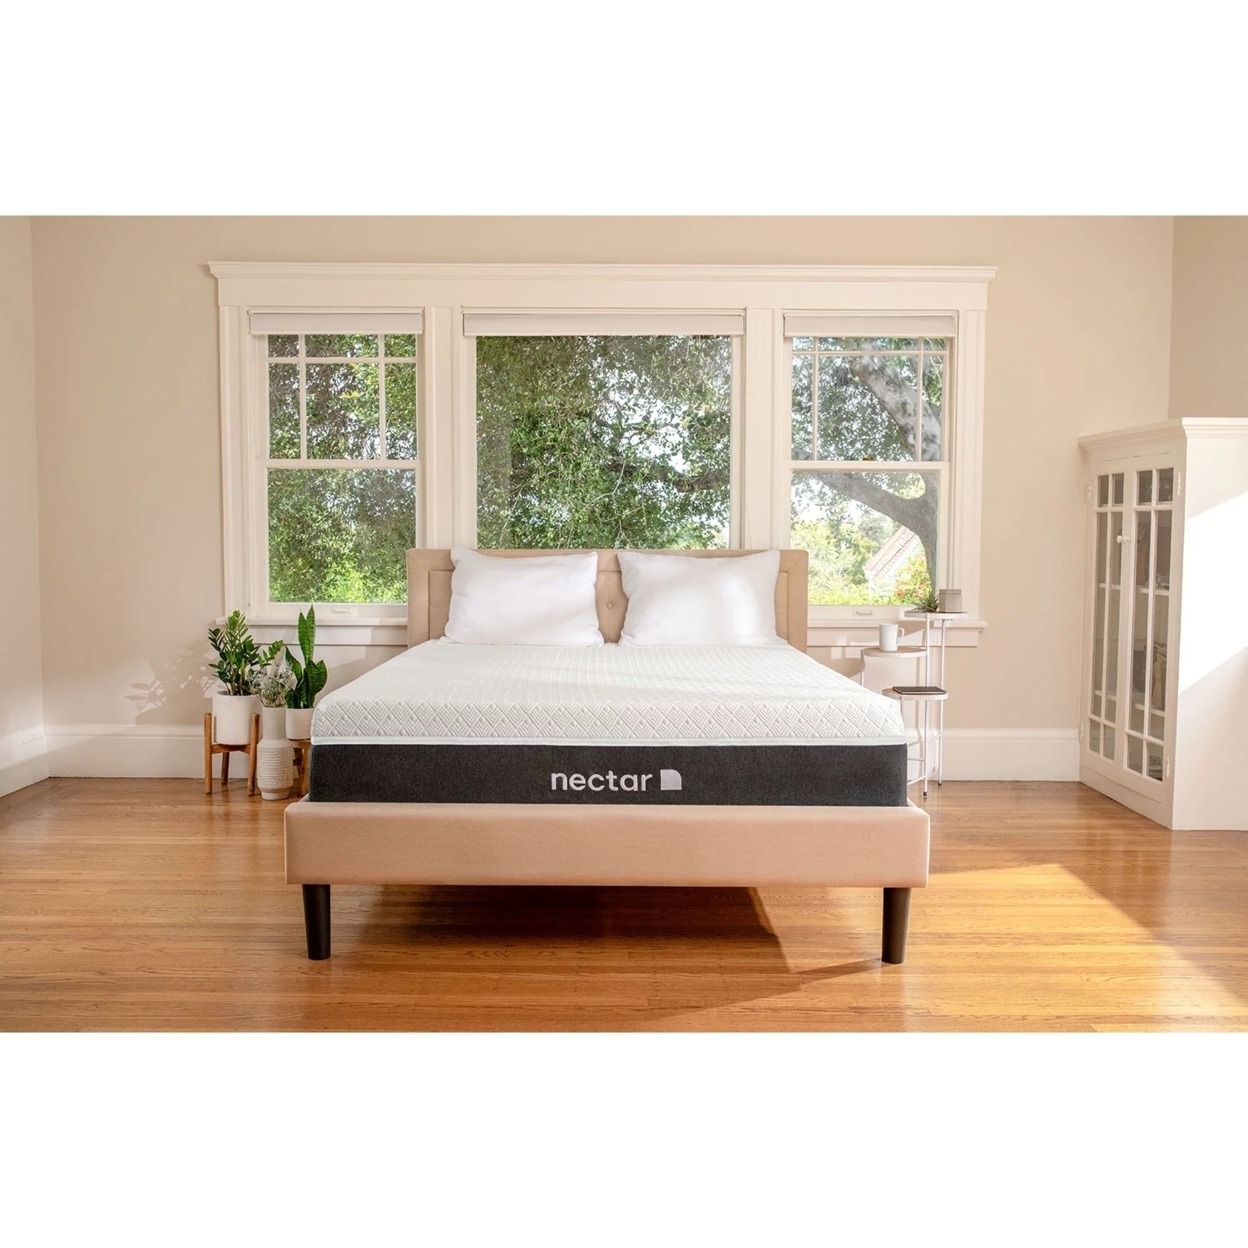 Nectar 12 Mattress With Gel Memory Foam & New Active Cooling Technology, Queen